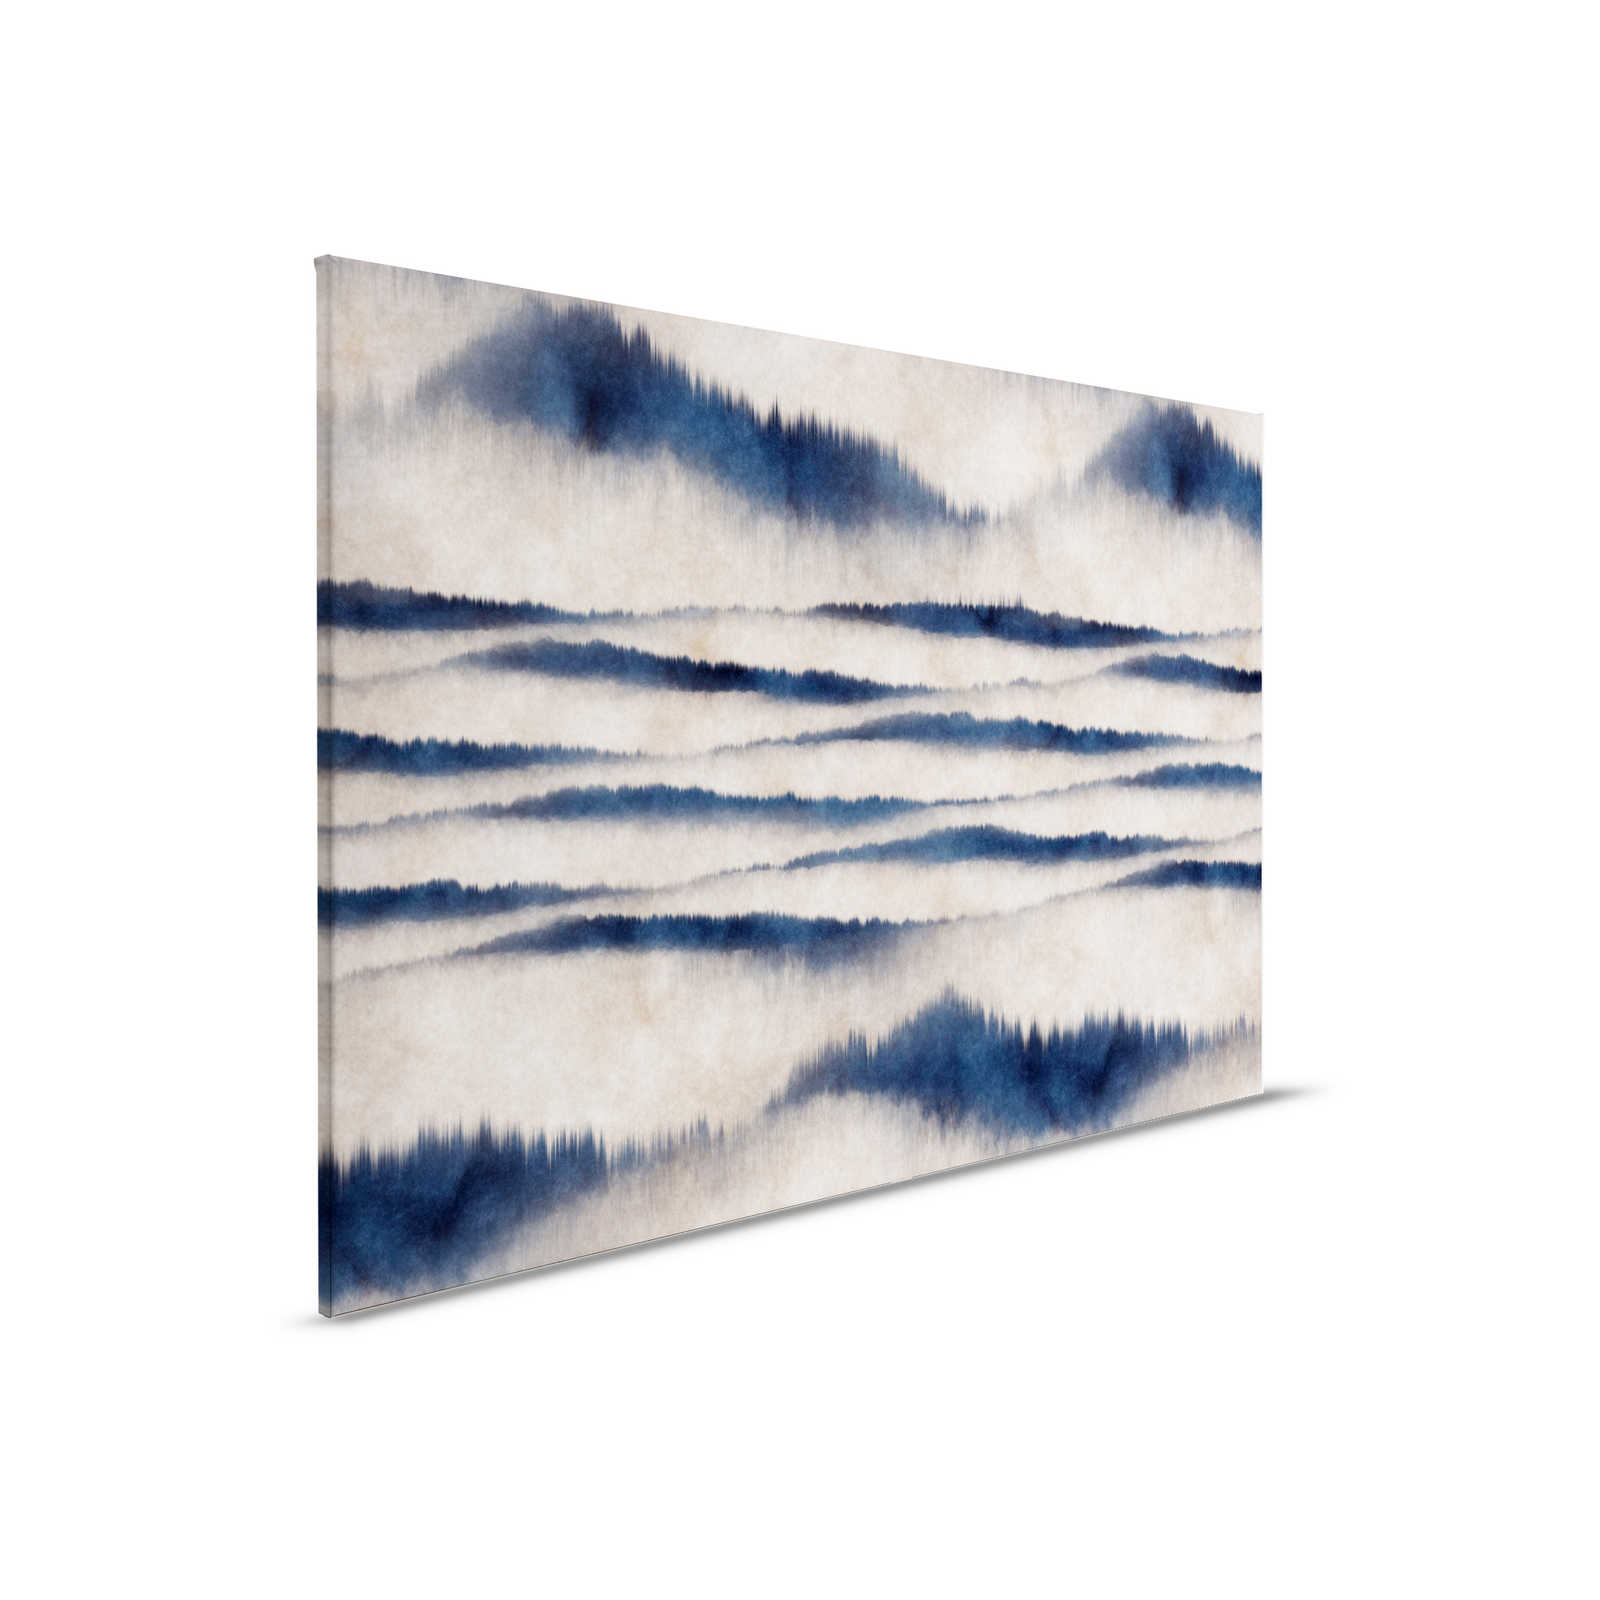         Canvas painting abstract pattern waves | blue, white - 0,90 m x 0,60 m
    